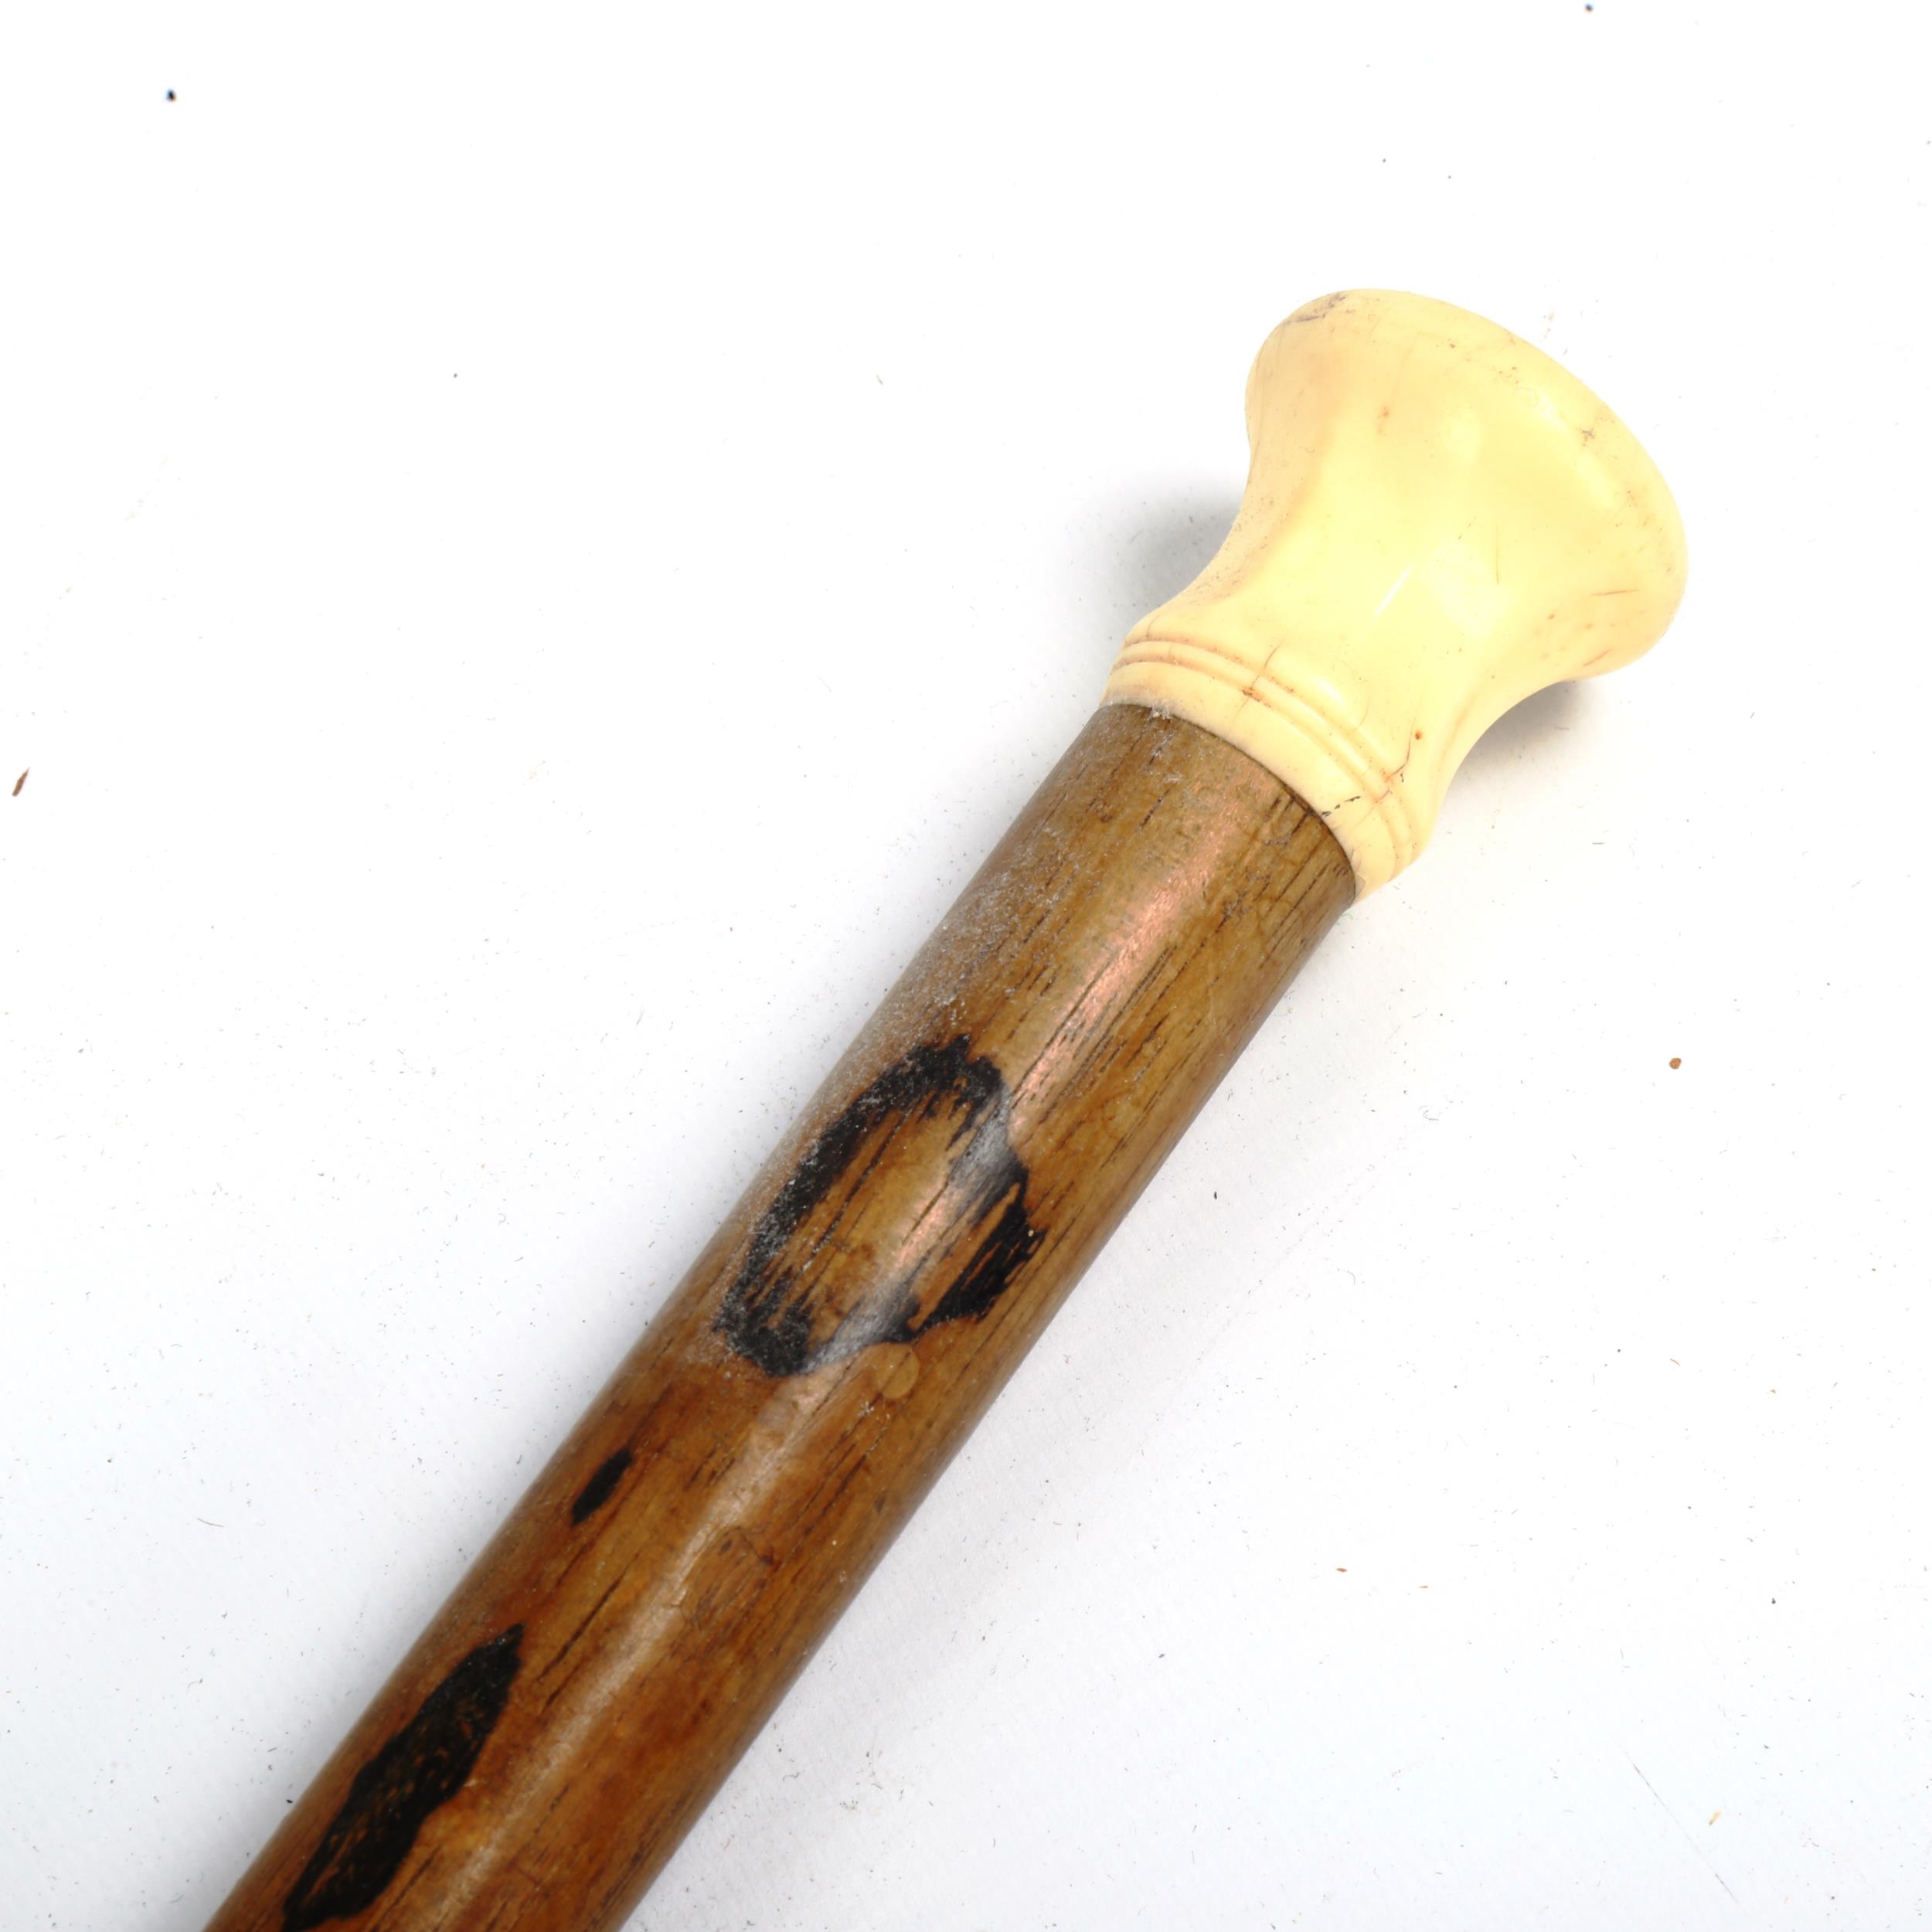 An 18th/19th century ivory-handled walking cane, with seal top - Image 3 of 5